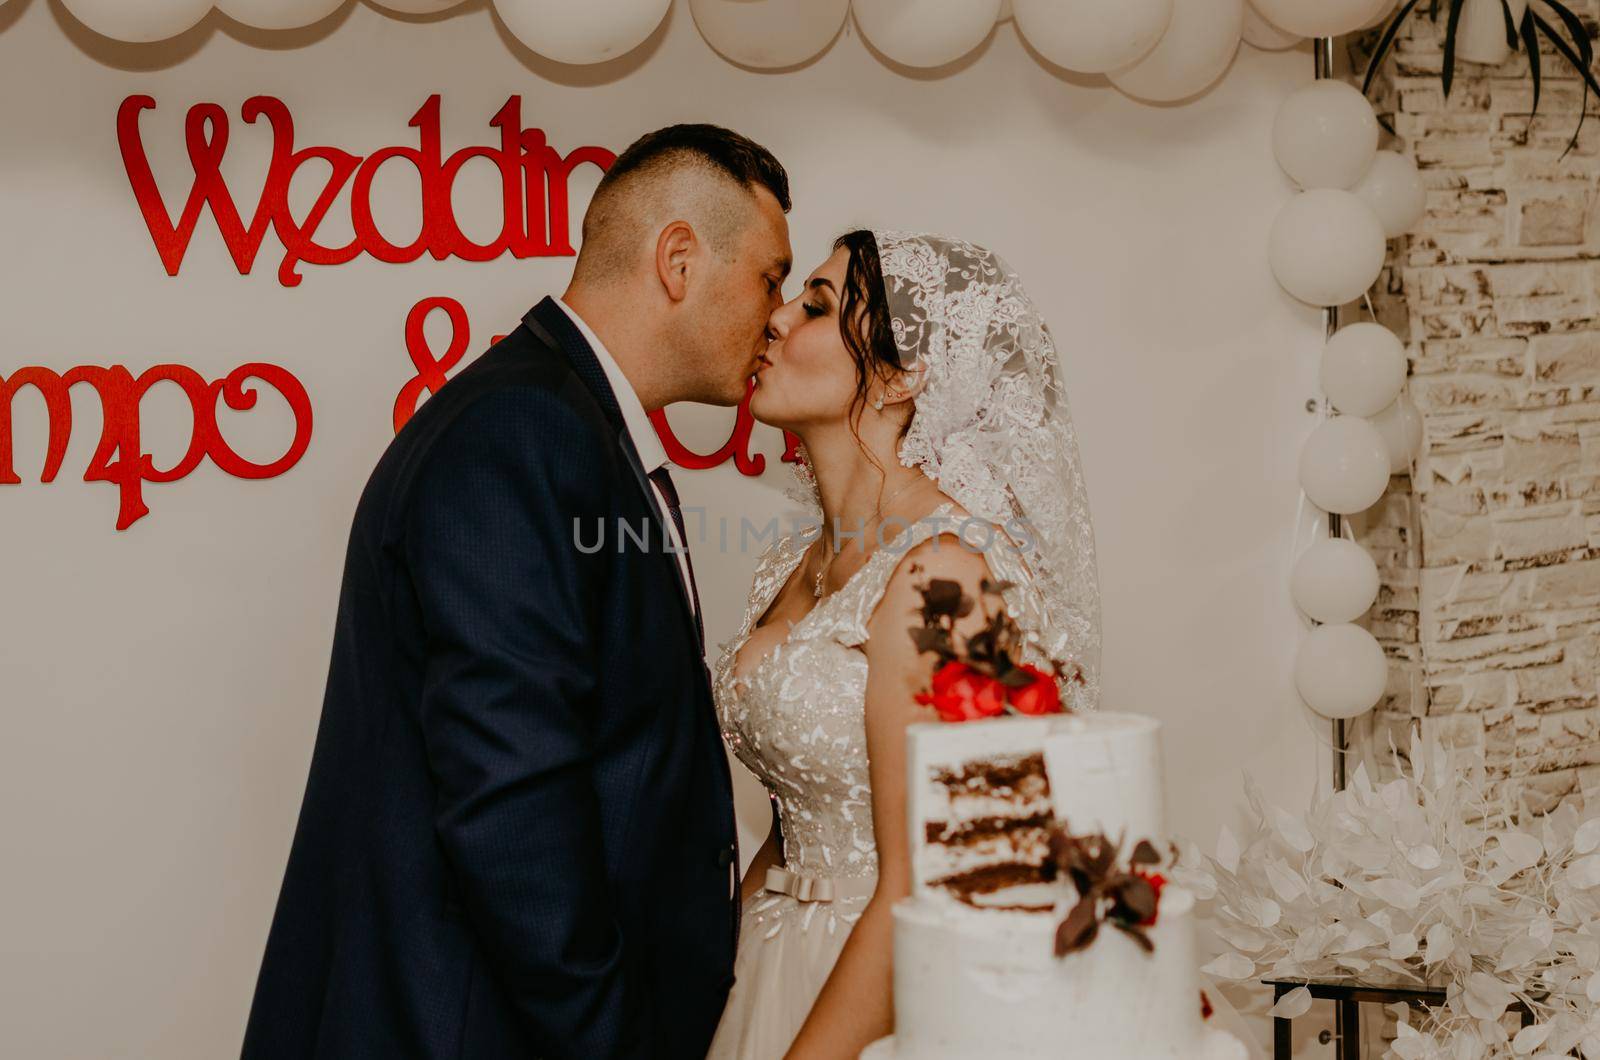 groom and bride at wedding cut their large multi-tiered white cake taste it fed from each other. by AndriiDrachuk